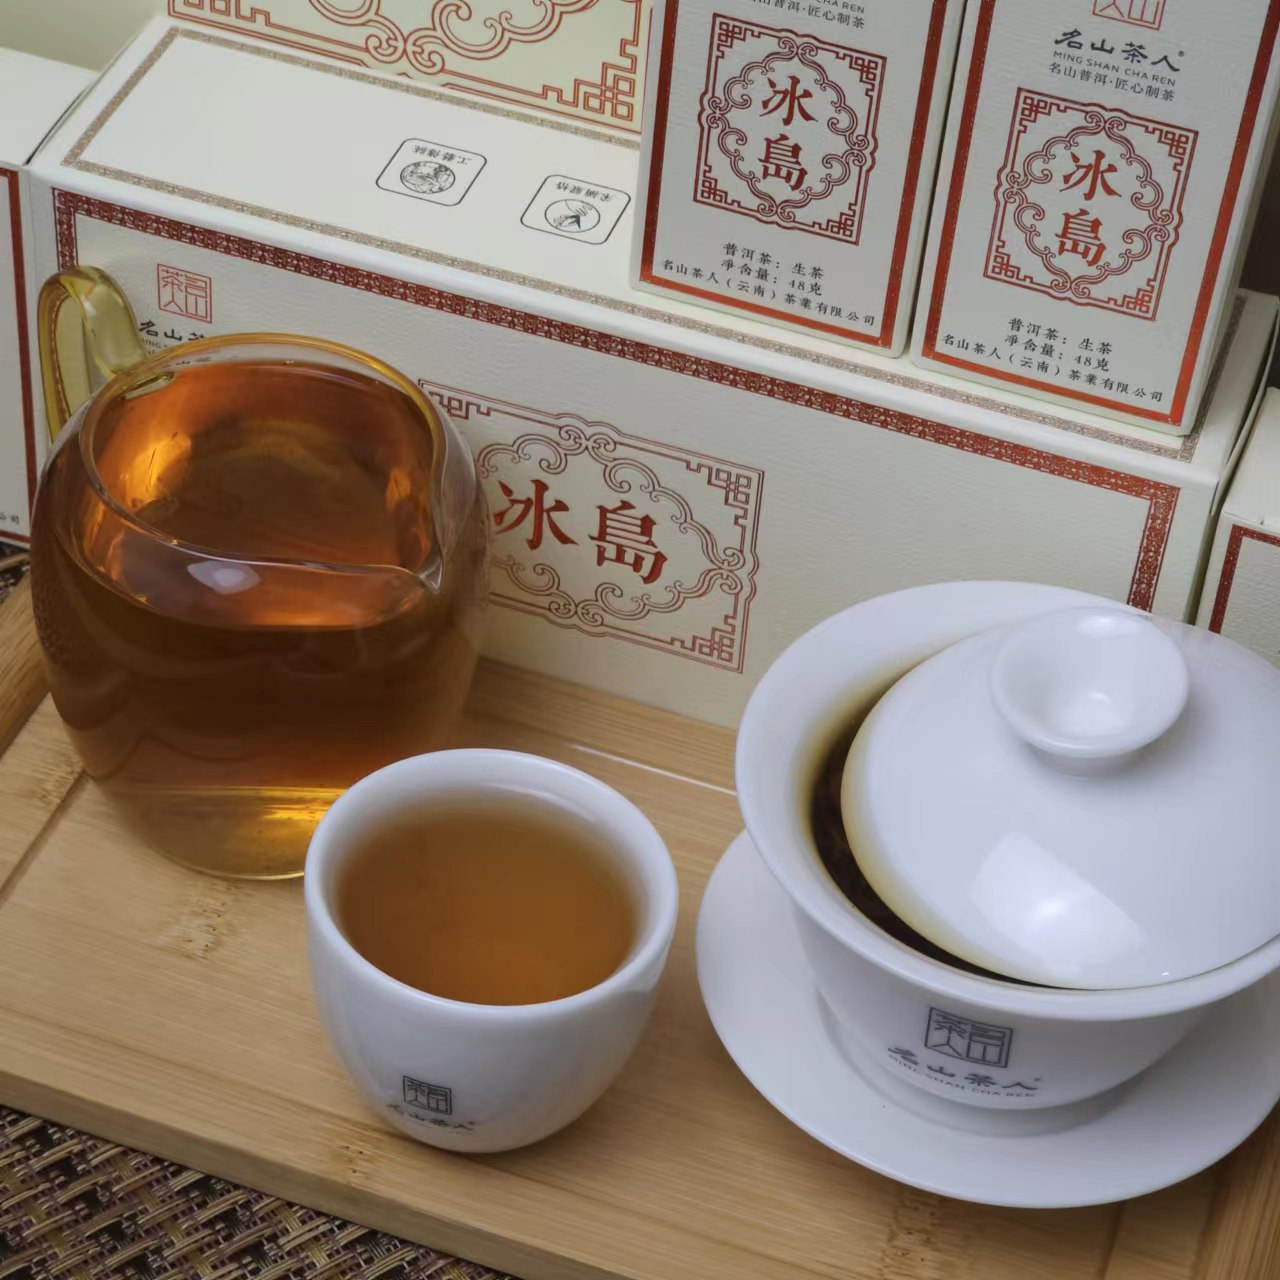 An affordable cup of Zen Tea Master's Icelandic raw tea delicately placed on a tray next to a box of tea.